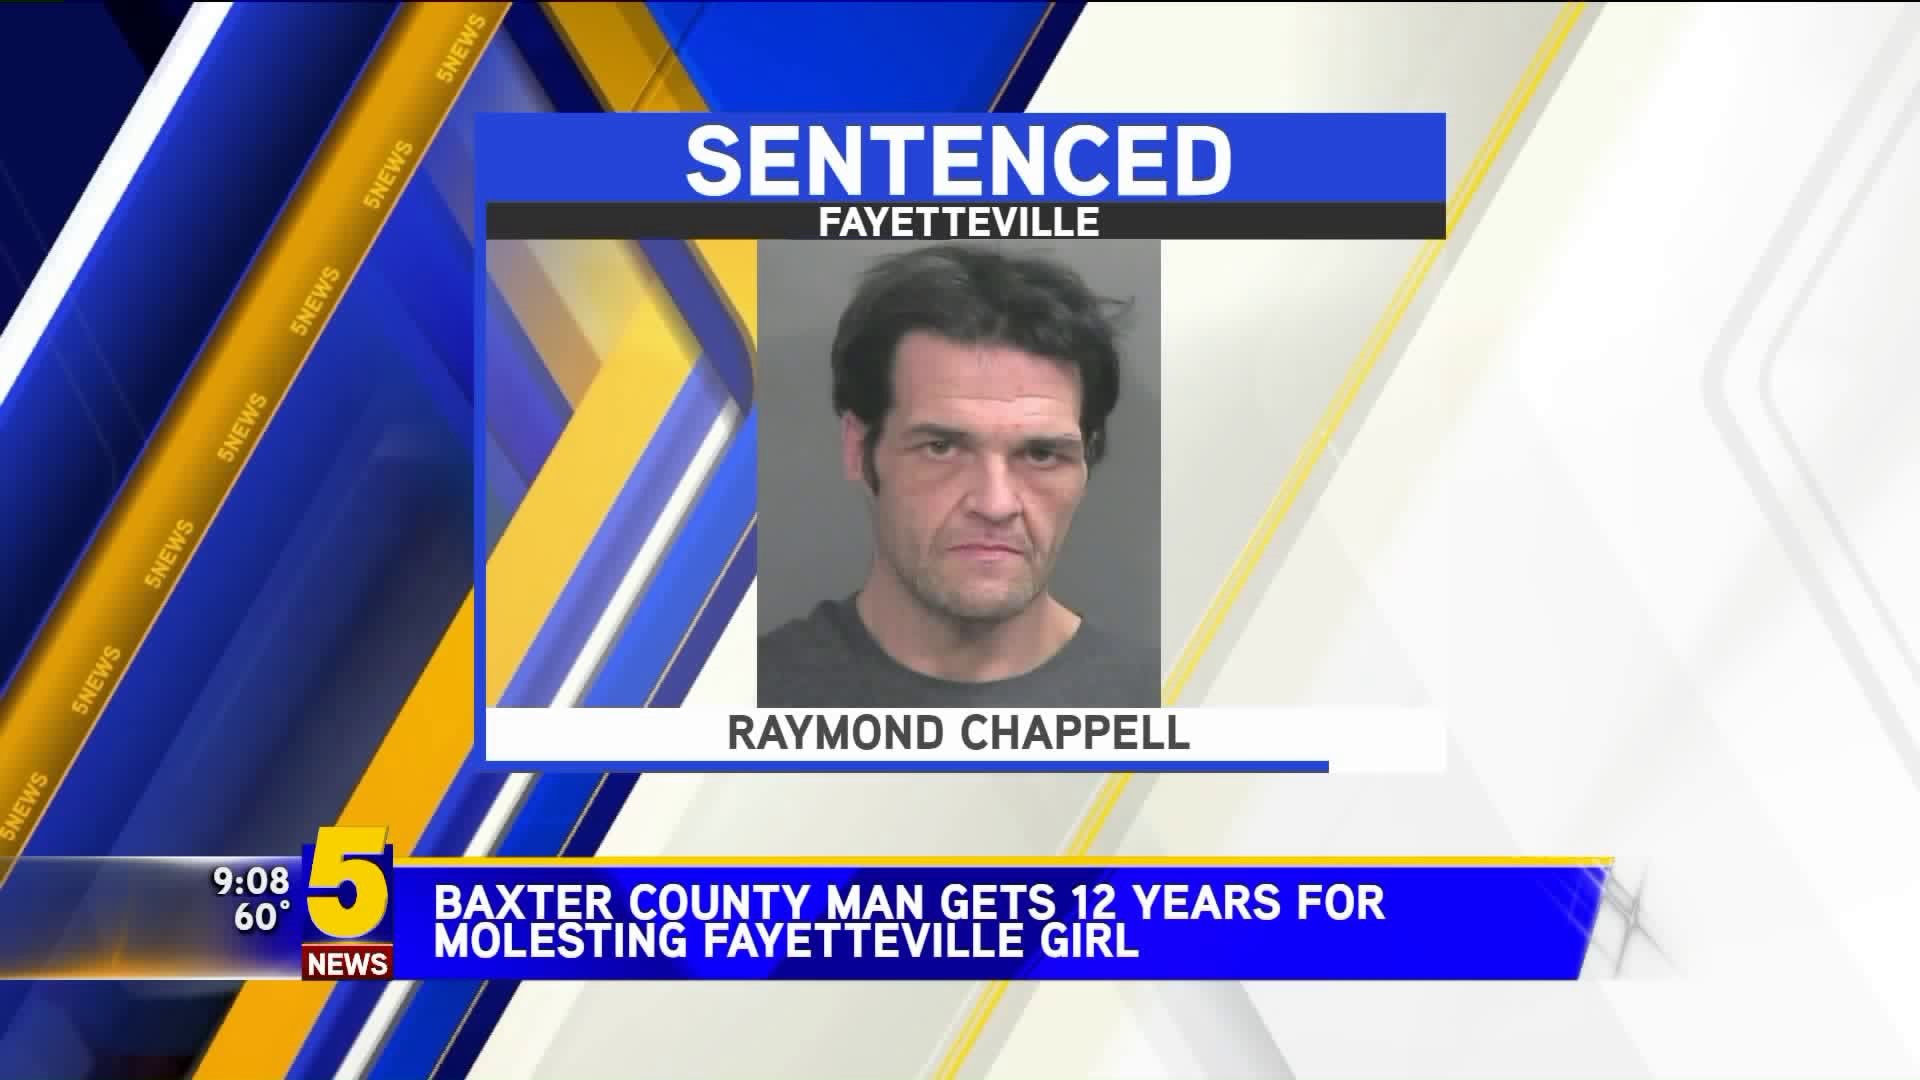 Baxter County Man Gets 12 Years For Molesting Fayetteville Girl